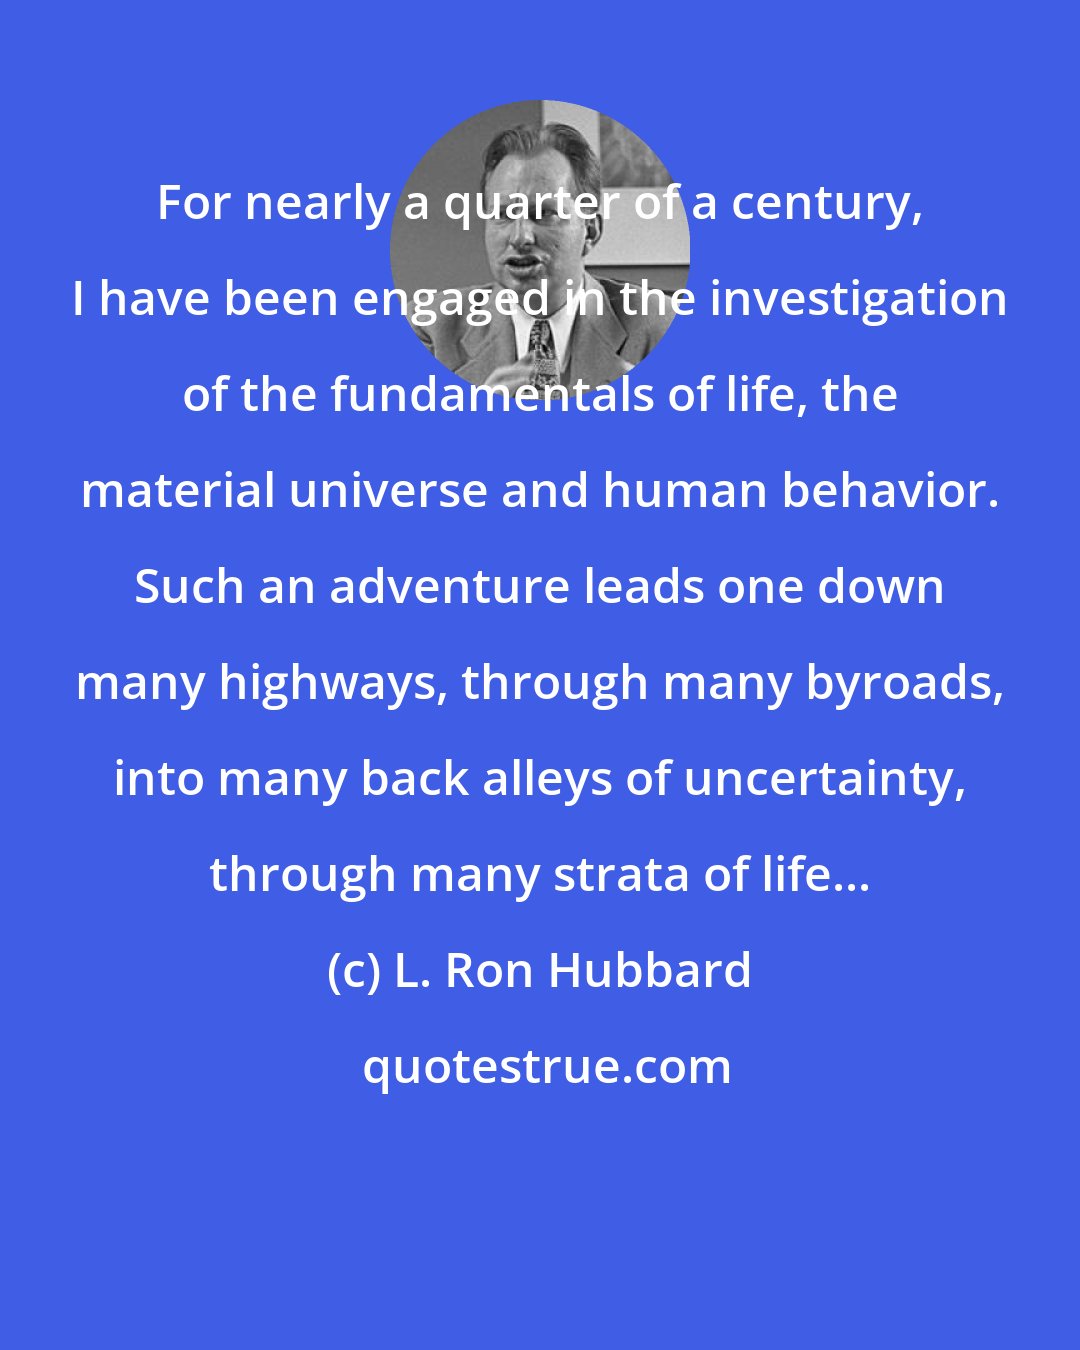 L. Ron Hubbard: For nearly a quarter of a century, I have been engaged in the investigation of the fundamentals of life, the material universe and human behavior. Such an adventure leads one down many highways, through many byroads, into many back alleys of uncertainty, through many strata of life...